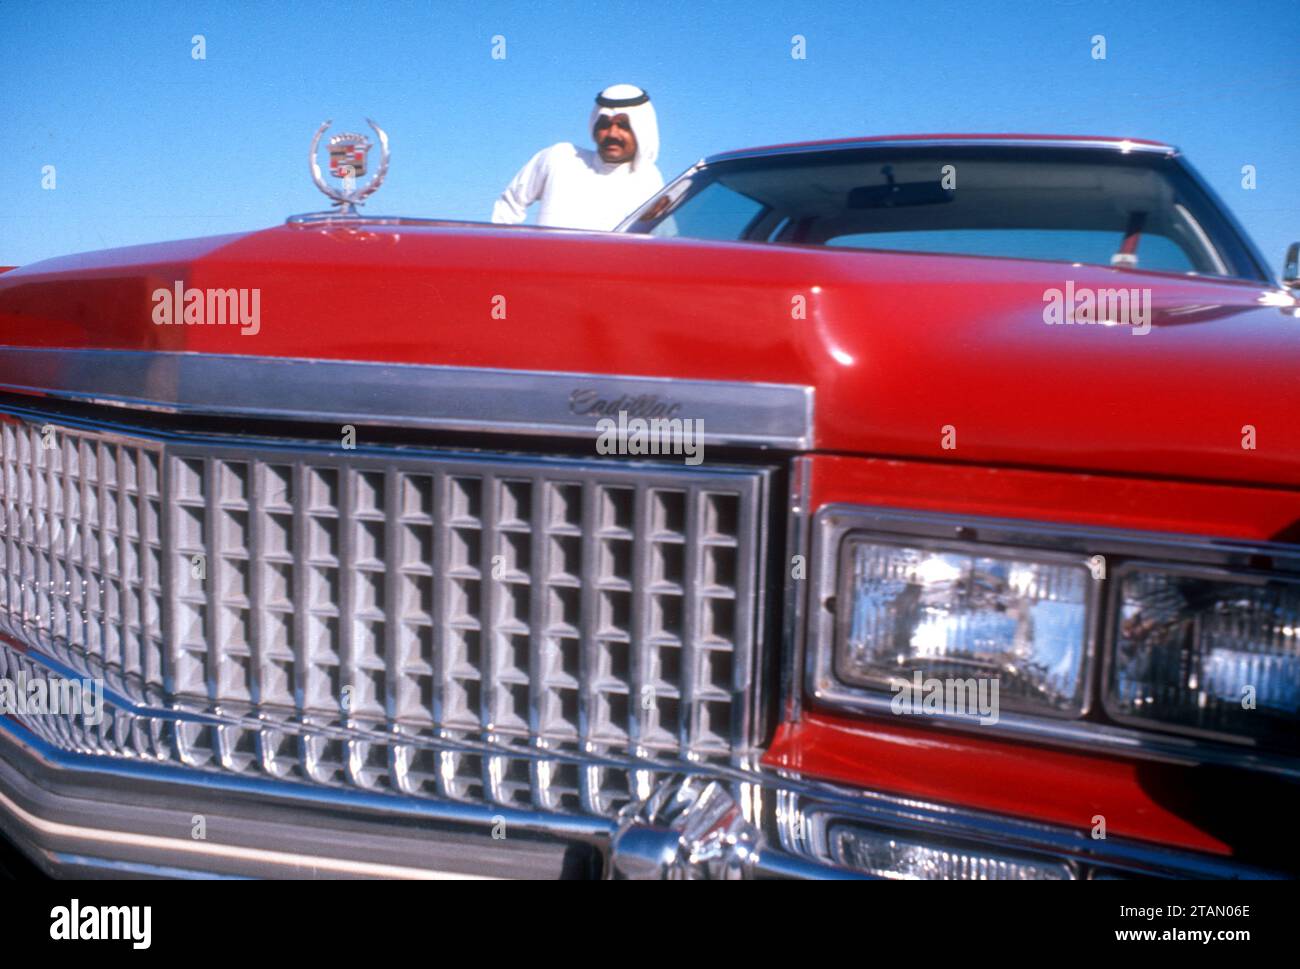 Oil sheikh posing with his Cadillac, United Arab Emirates, 1975 Stock Photo